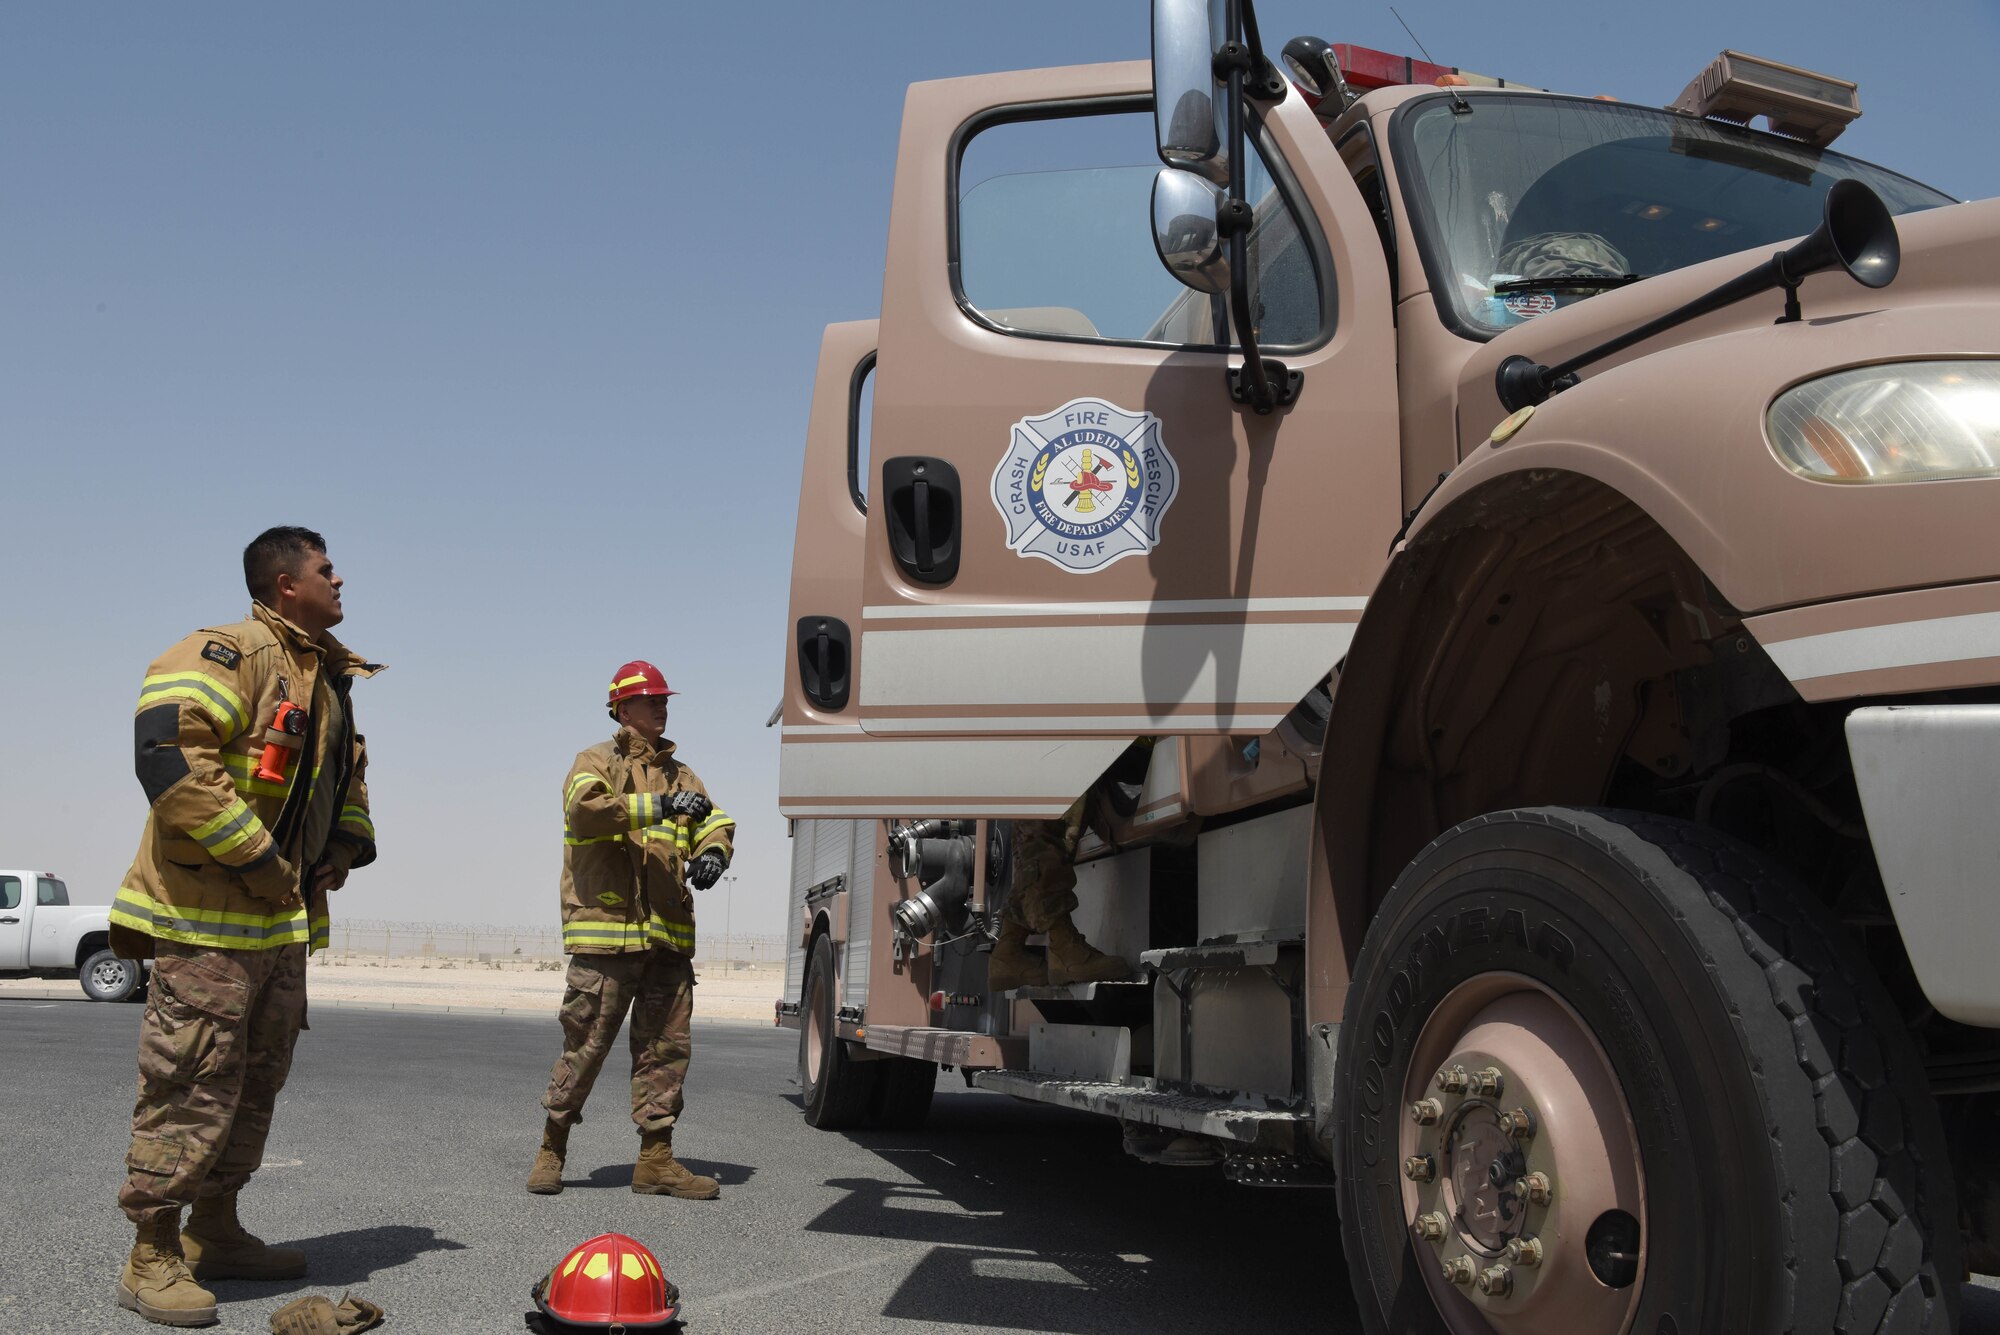 The 379th Expeditionary Civil Engineer Squadron Fire Station One Airmen put on personal protective equipment on June 6, 2019, at Al Udeid Air Base, Qatar. The 379th ECES fire department provides fire and emergency service where they protect lives and properties from fires. (U.S. Air Force photo by Staff Sgt. Ashley L. Gardner)